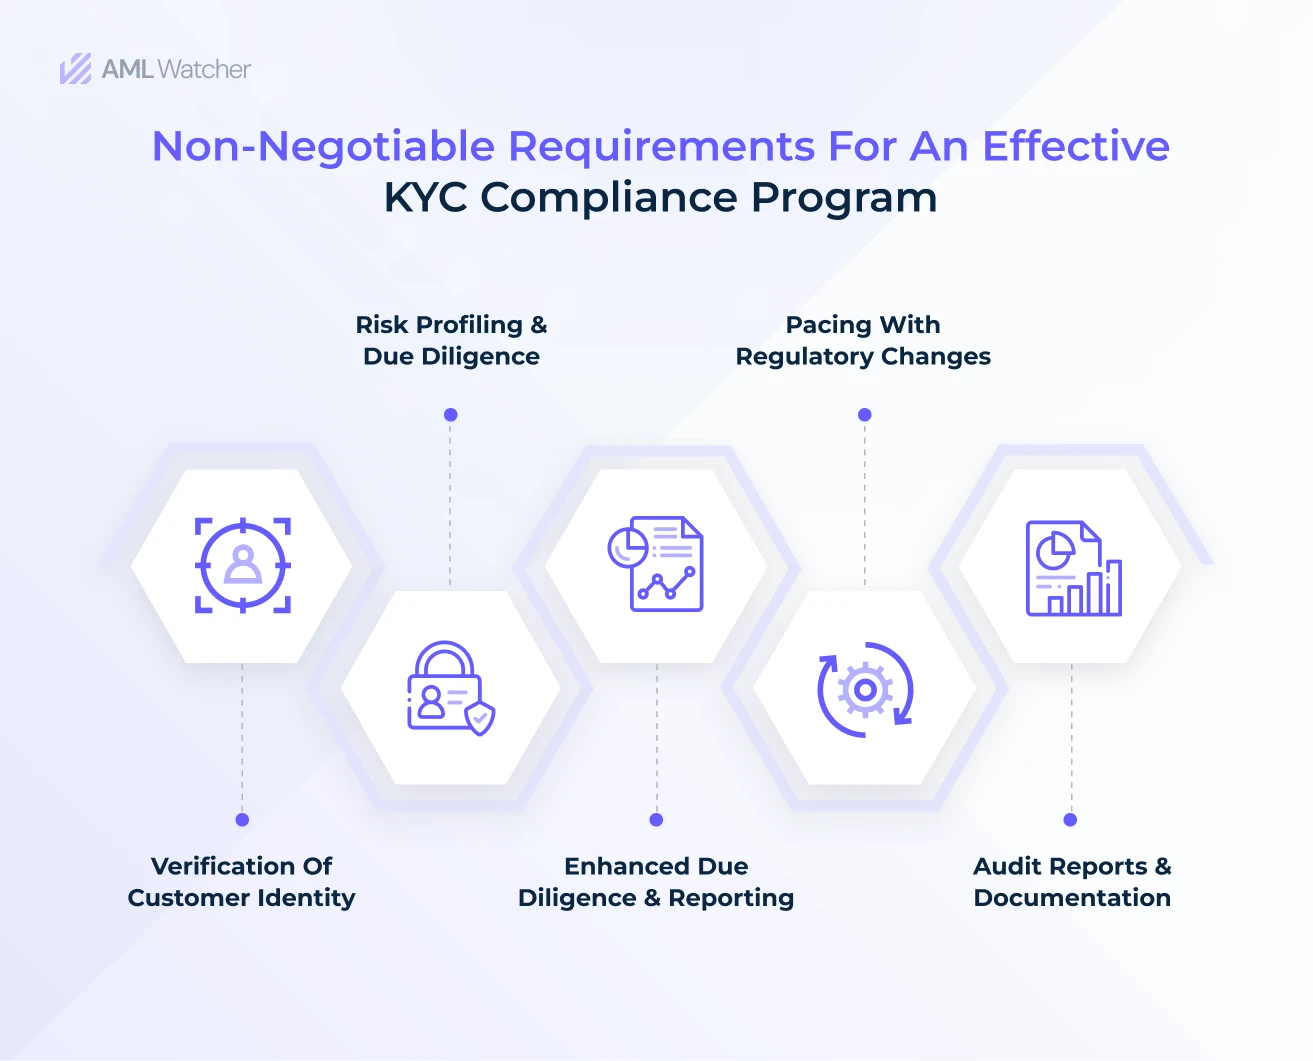 A comprehensive trail of KYC requirements to stay compliant with AML/KYC regulations including customer identity verification, customer & enhanced due diligence, and stringent documentation. 